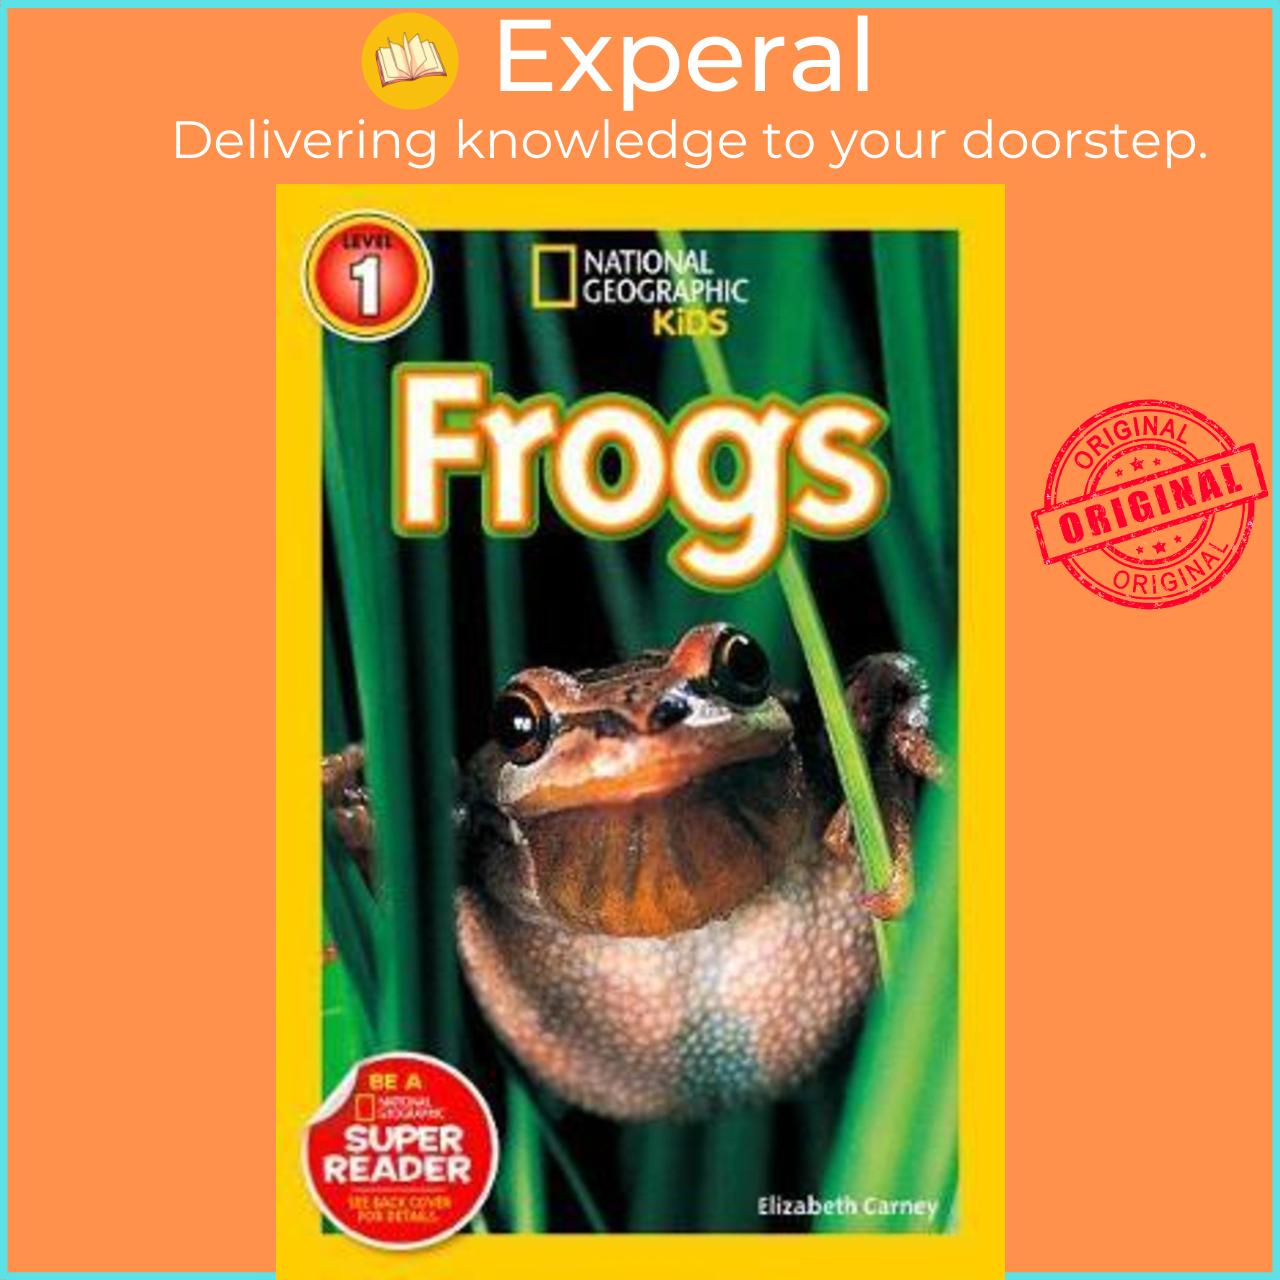 Sách - National Geographic Kids Readers: Frogs by Elizabeth Carney National Geographic Kids (US edition, paperback)